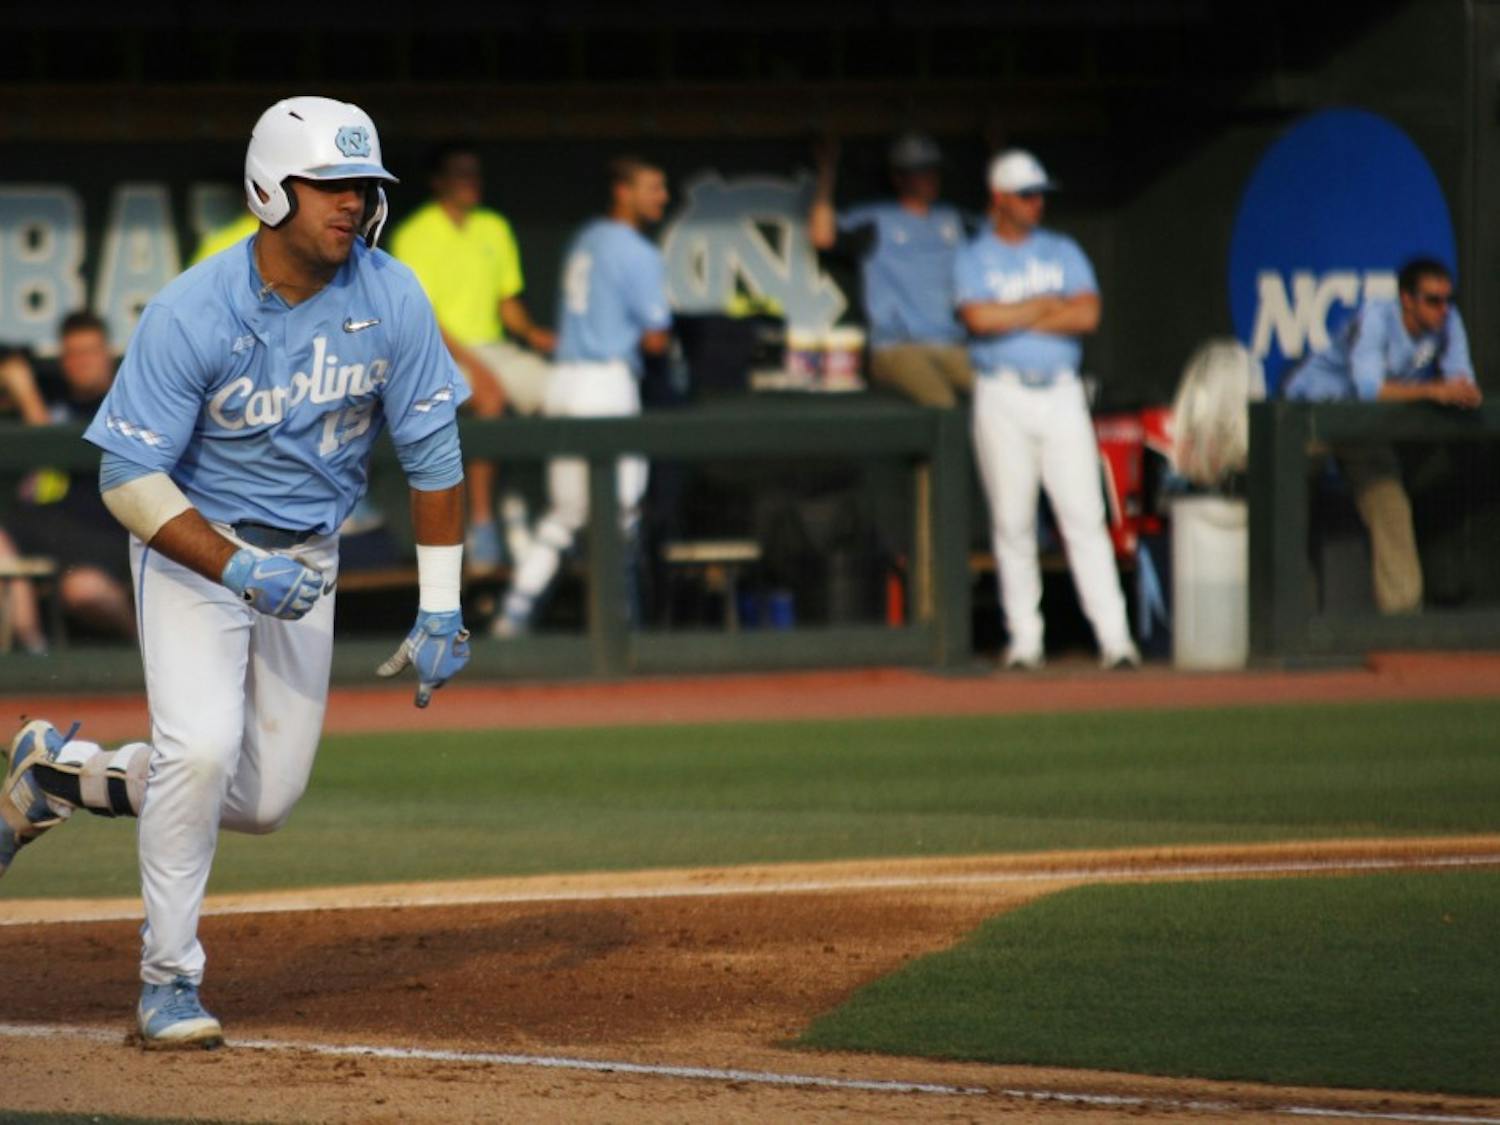 UNC baseball first-year and first basemen, Aaron Sabato (19), runs to first base after hitting the ball during the final game in the regional championships versus Tennessee on Sunday June 2, 2019. UNC won 5-2.&nbsp;